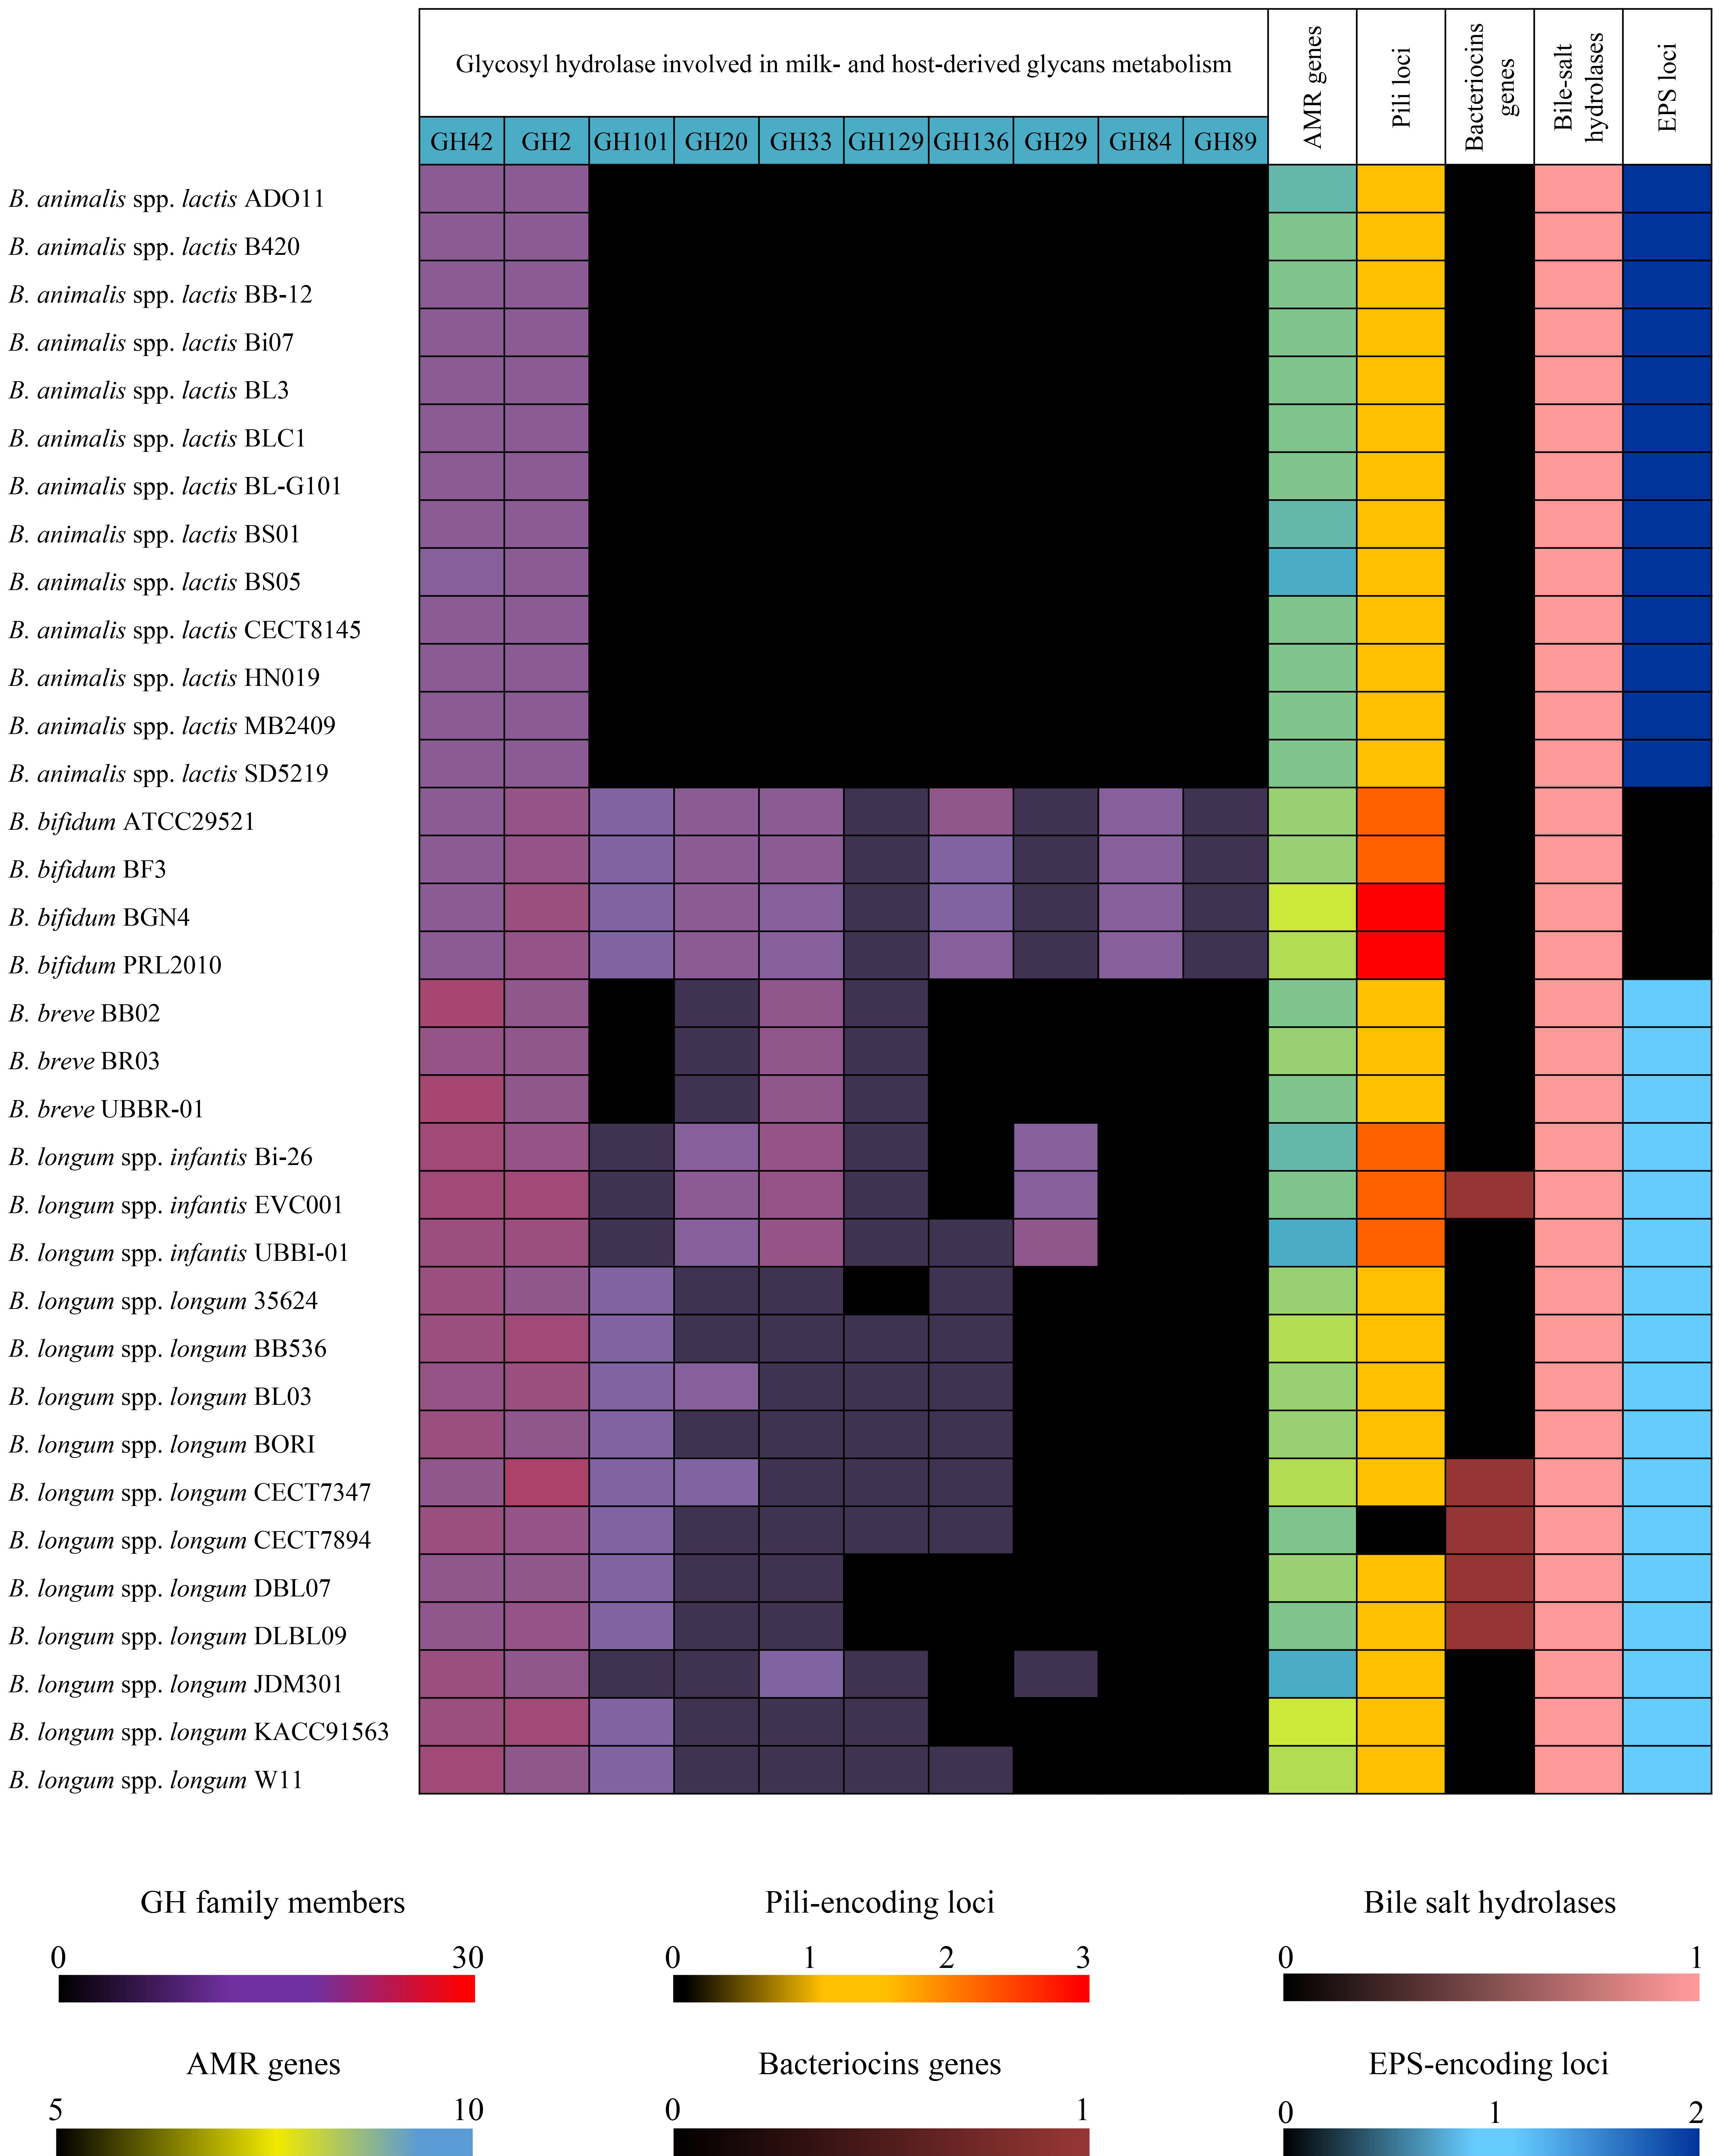 The Integrated Probiotic Database: a genomic compendium of bifidobacterial health-promoting strains